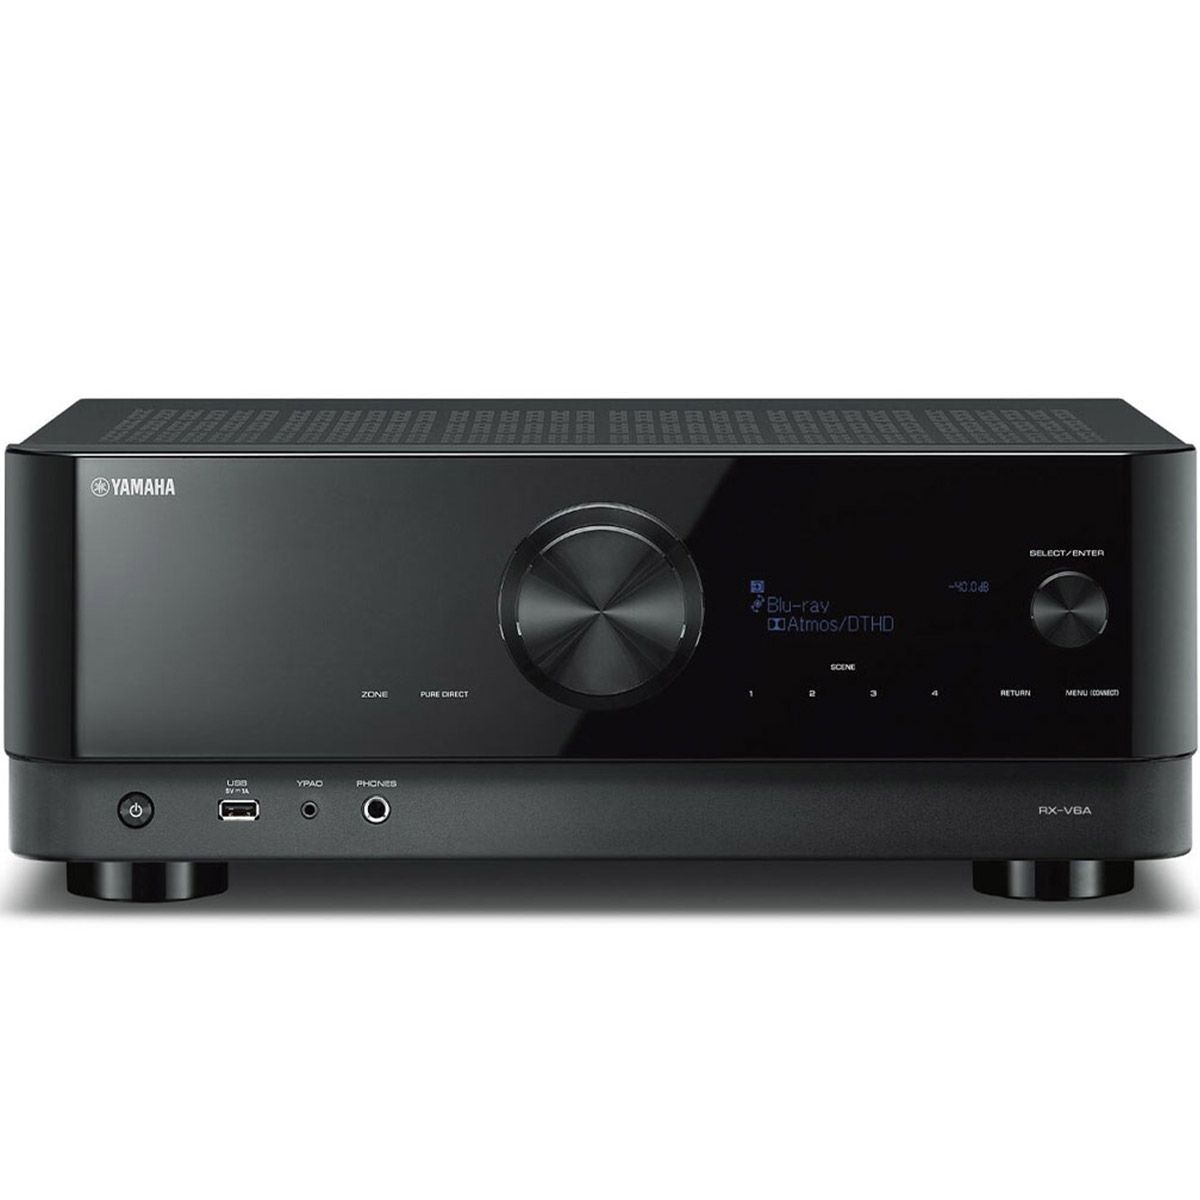 Yamaha RX-V6A 7.2-Channel AV Receiver - front view